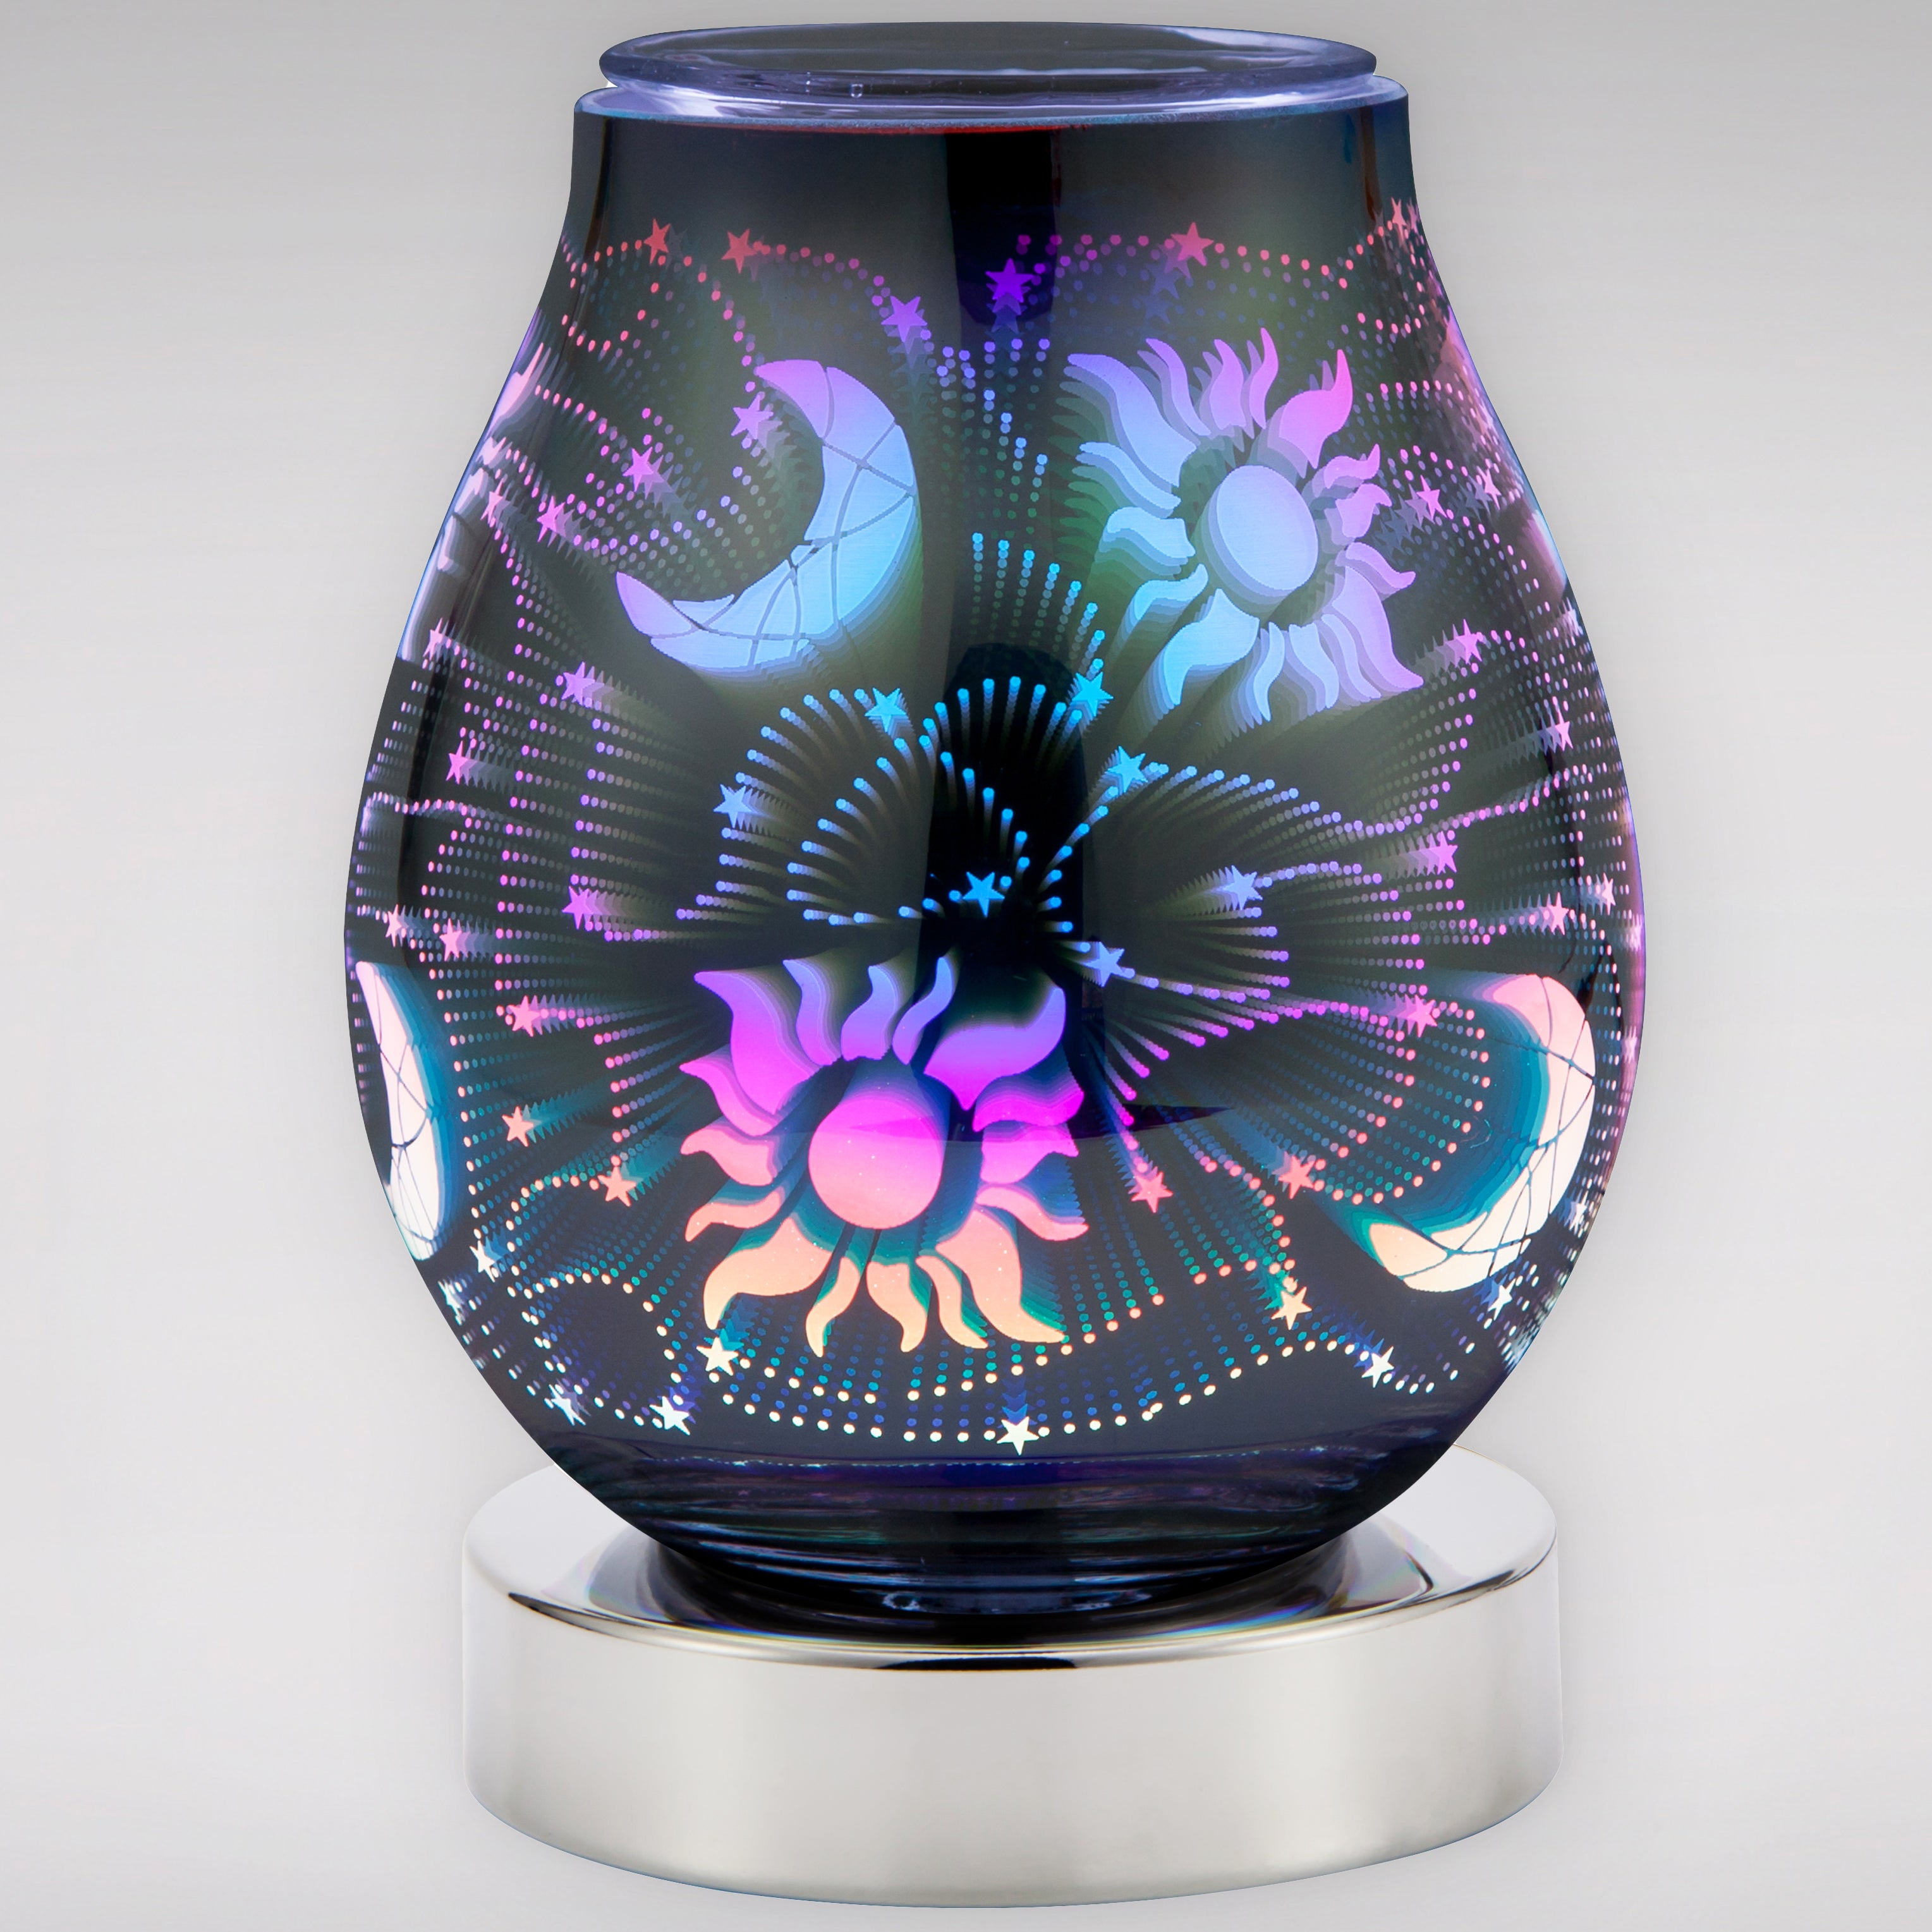 Scentchips Warmer with LED 'Celestial' Colour Changing Display